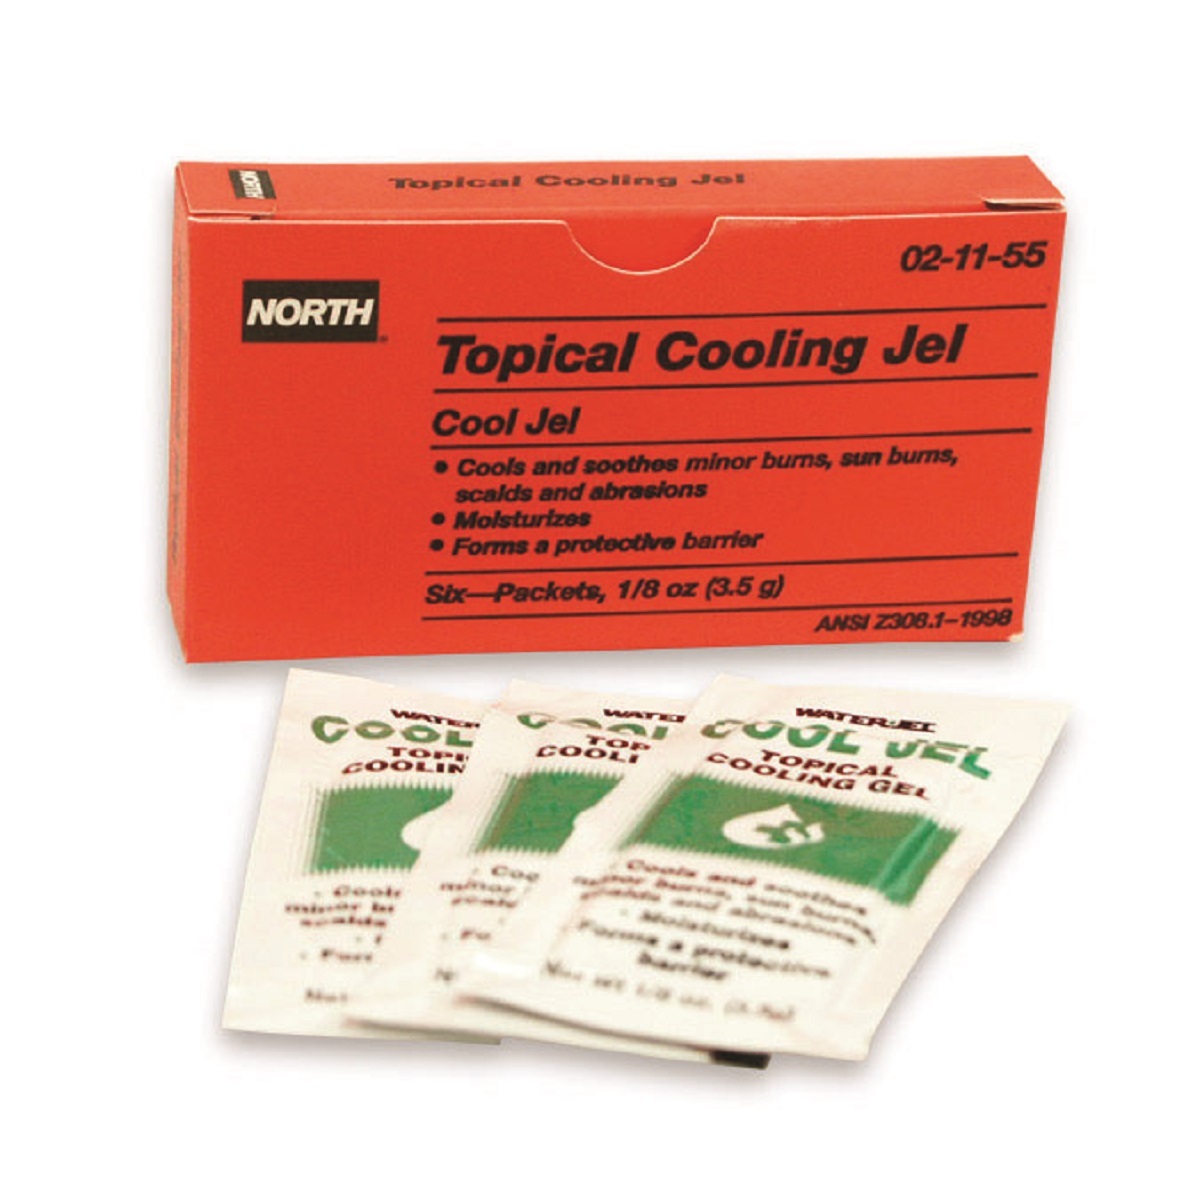 Honeywell 1/8 Ounce Water-Jel®/Cool Jel® Topical Cooling Gel (6 Per Box)